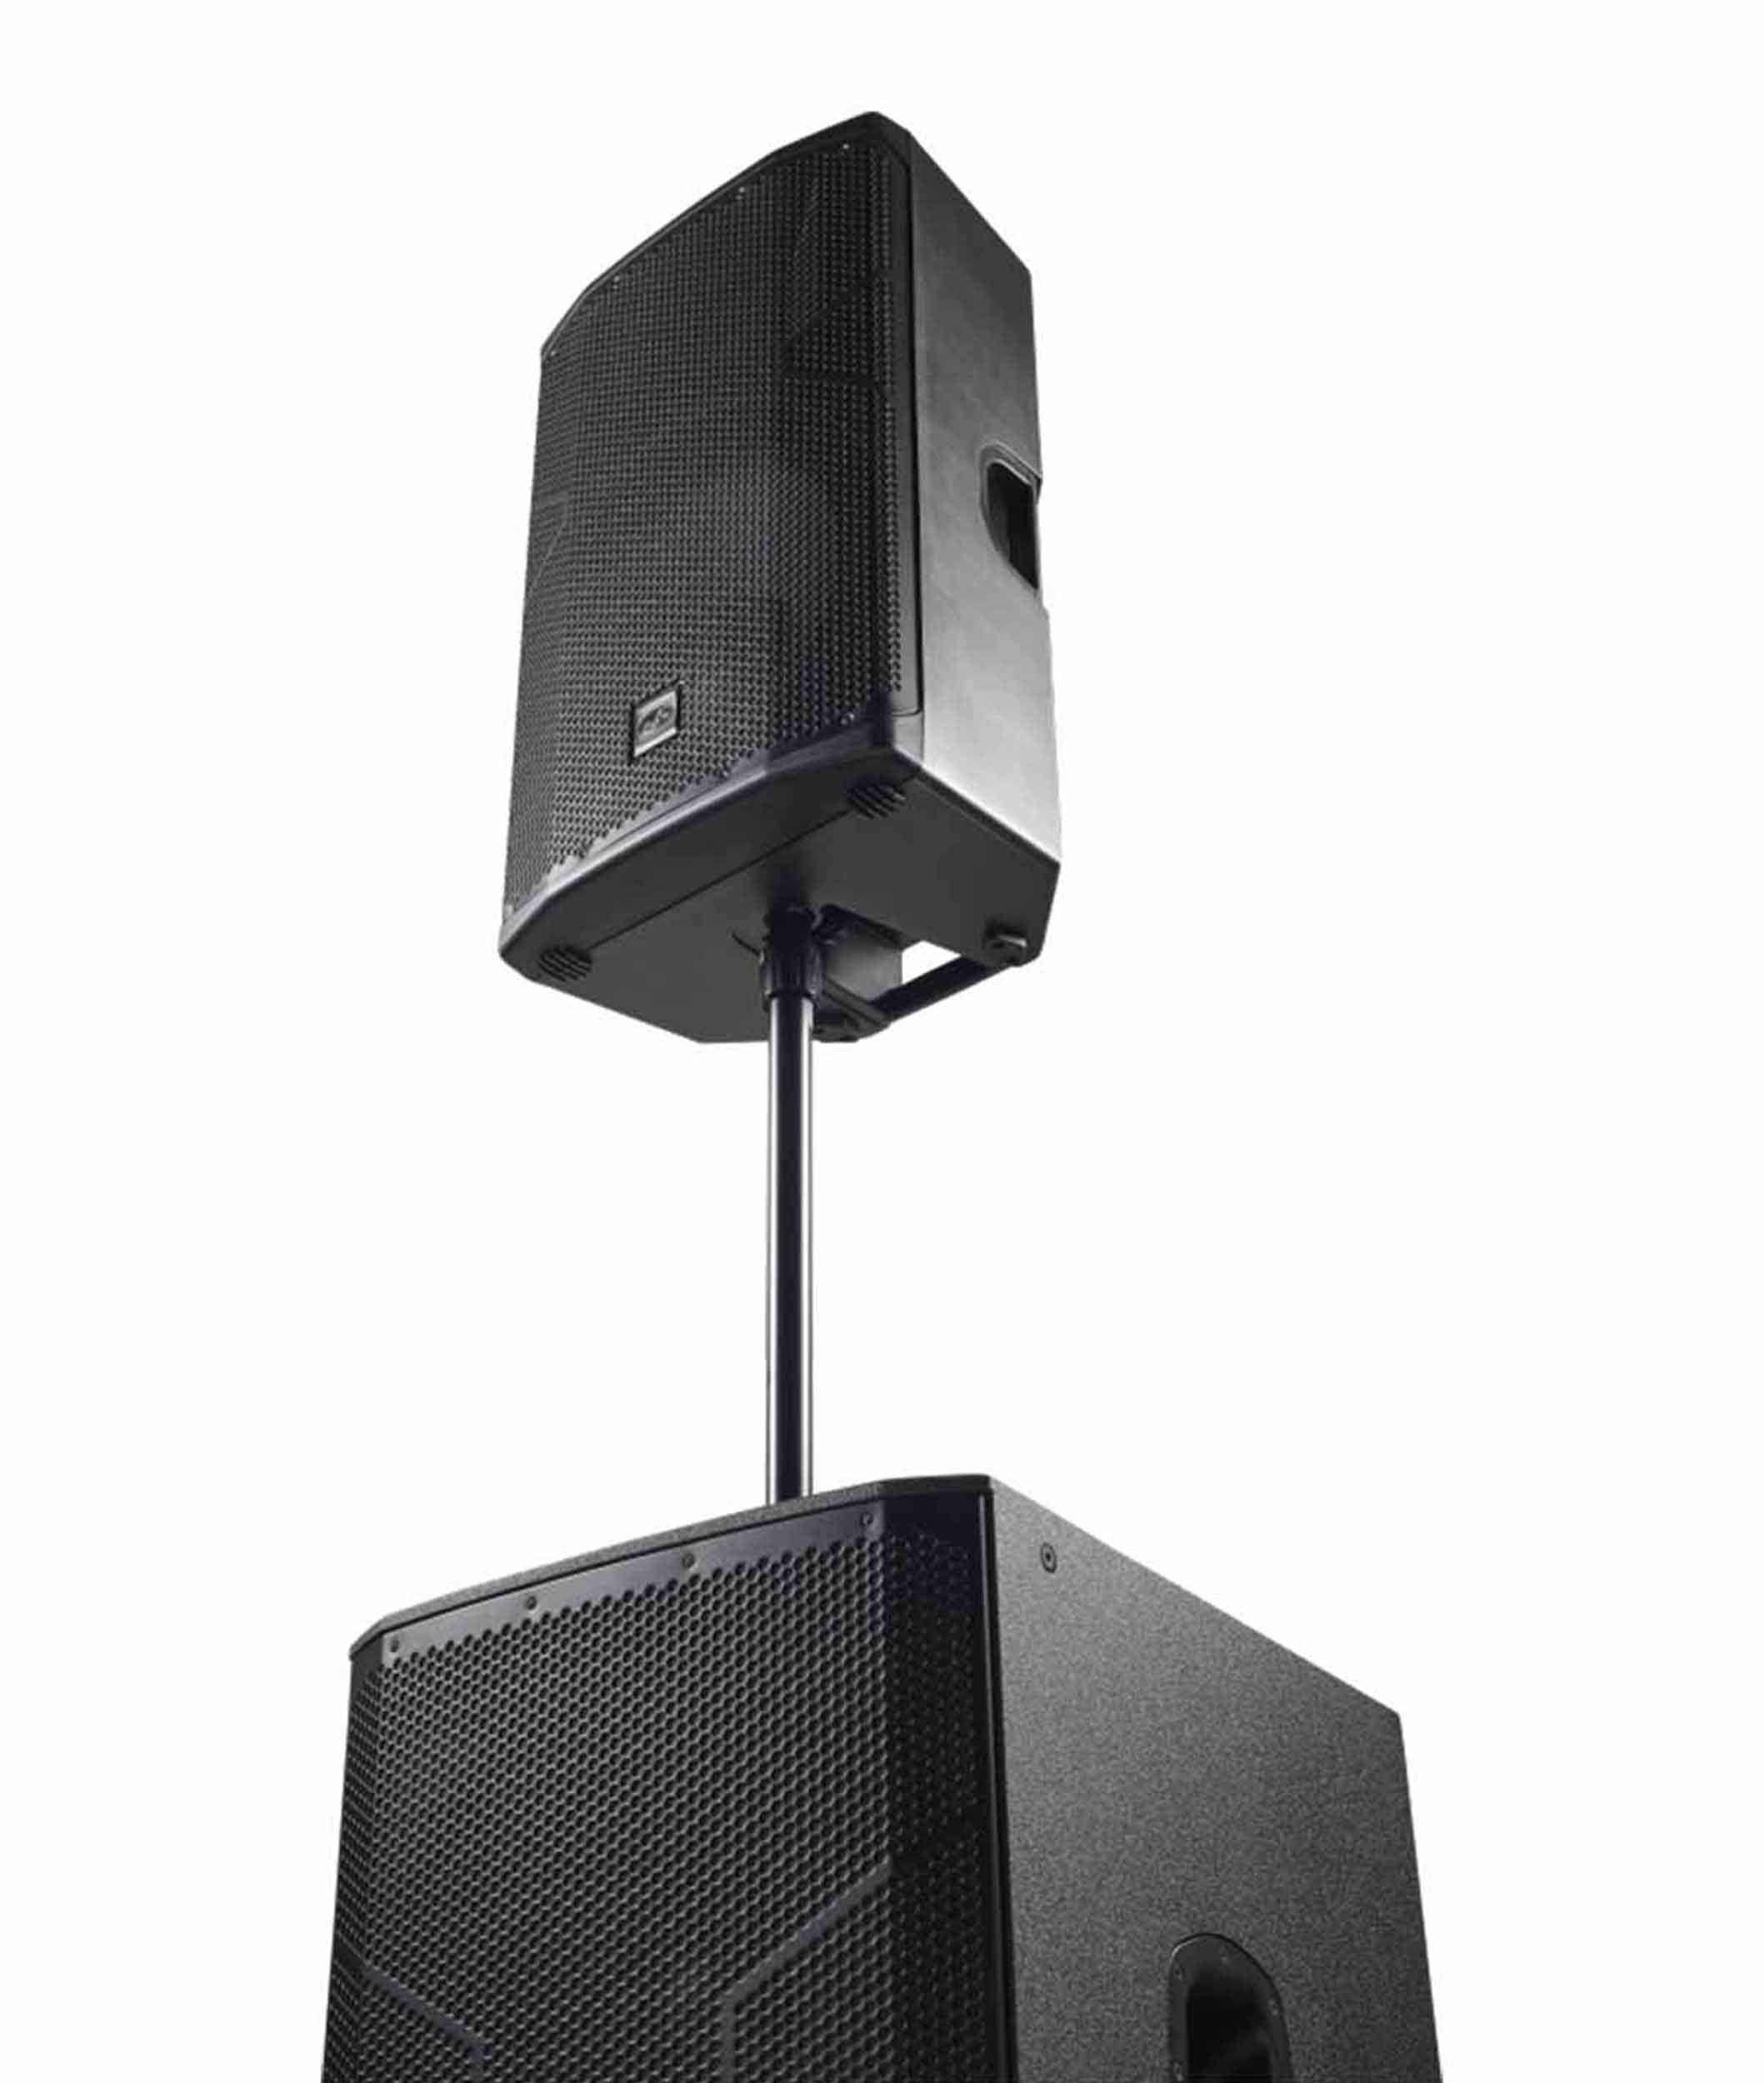 DAS Audio ALTEA-412A 12 Inch 2 Way Powered Portable PA System Speakers - Black by DAS Audio